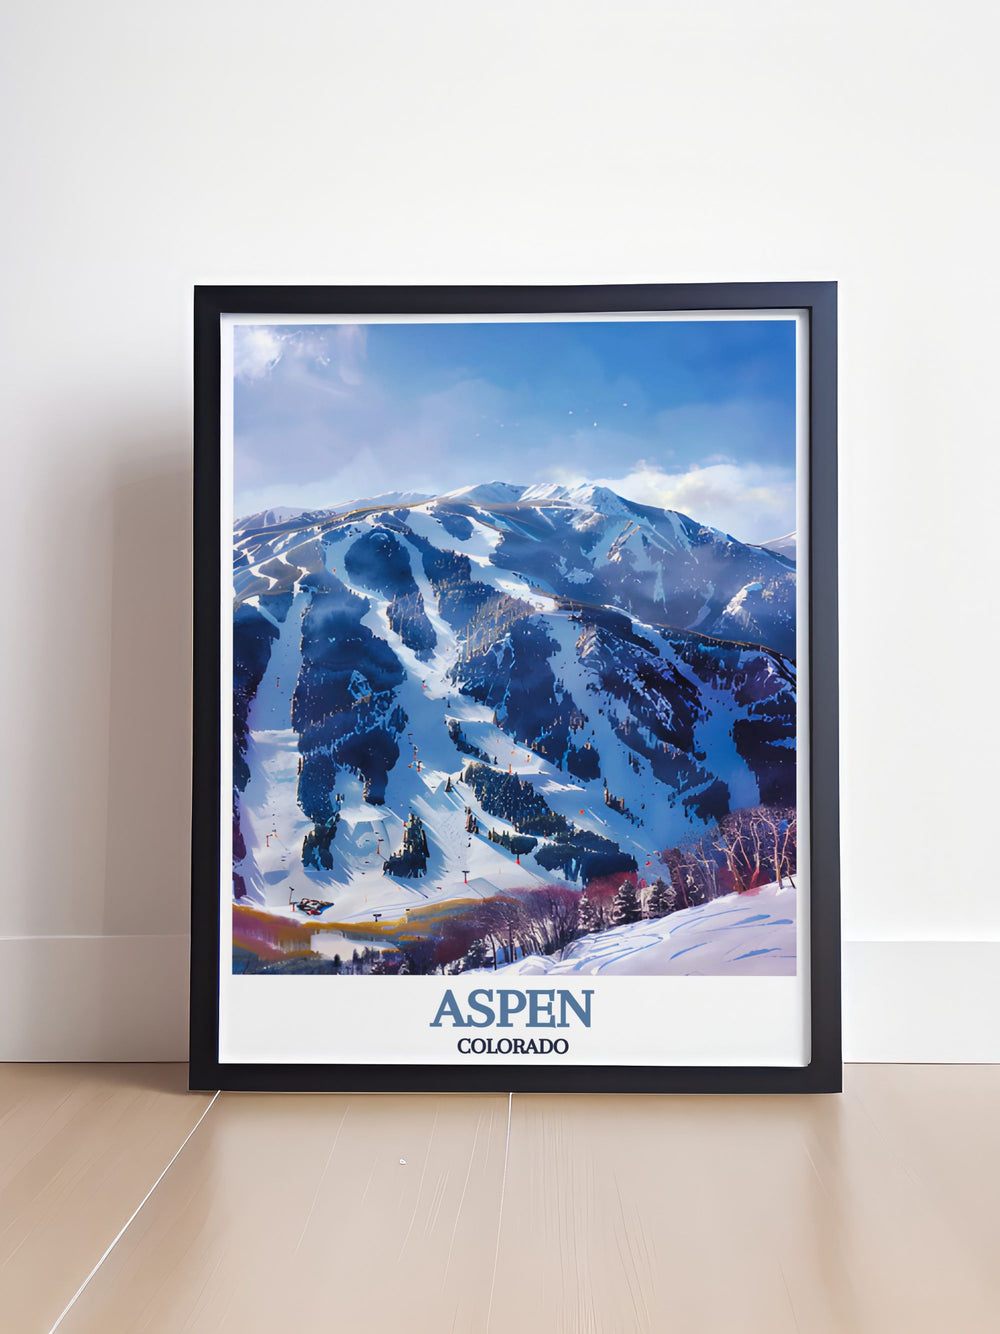 The excitement of skiing at Aspen Highlands is depicted in this vibrant travel poster, featuring its iconic Highland Bowl and panoramic views. A must have for any skiers home decor.